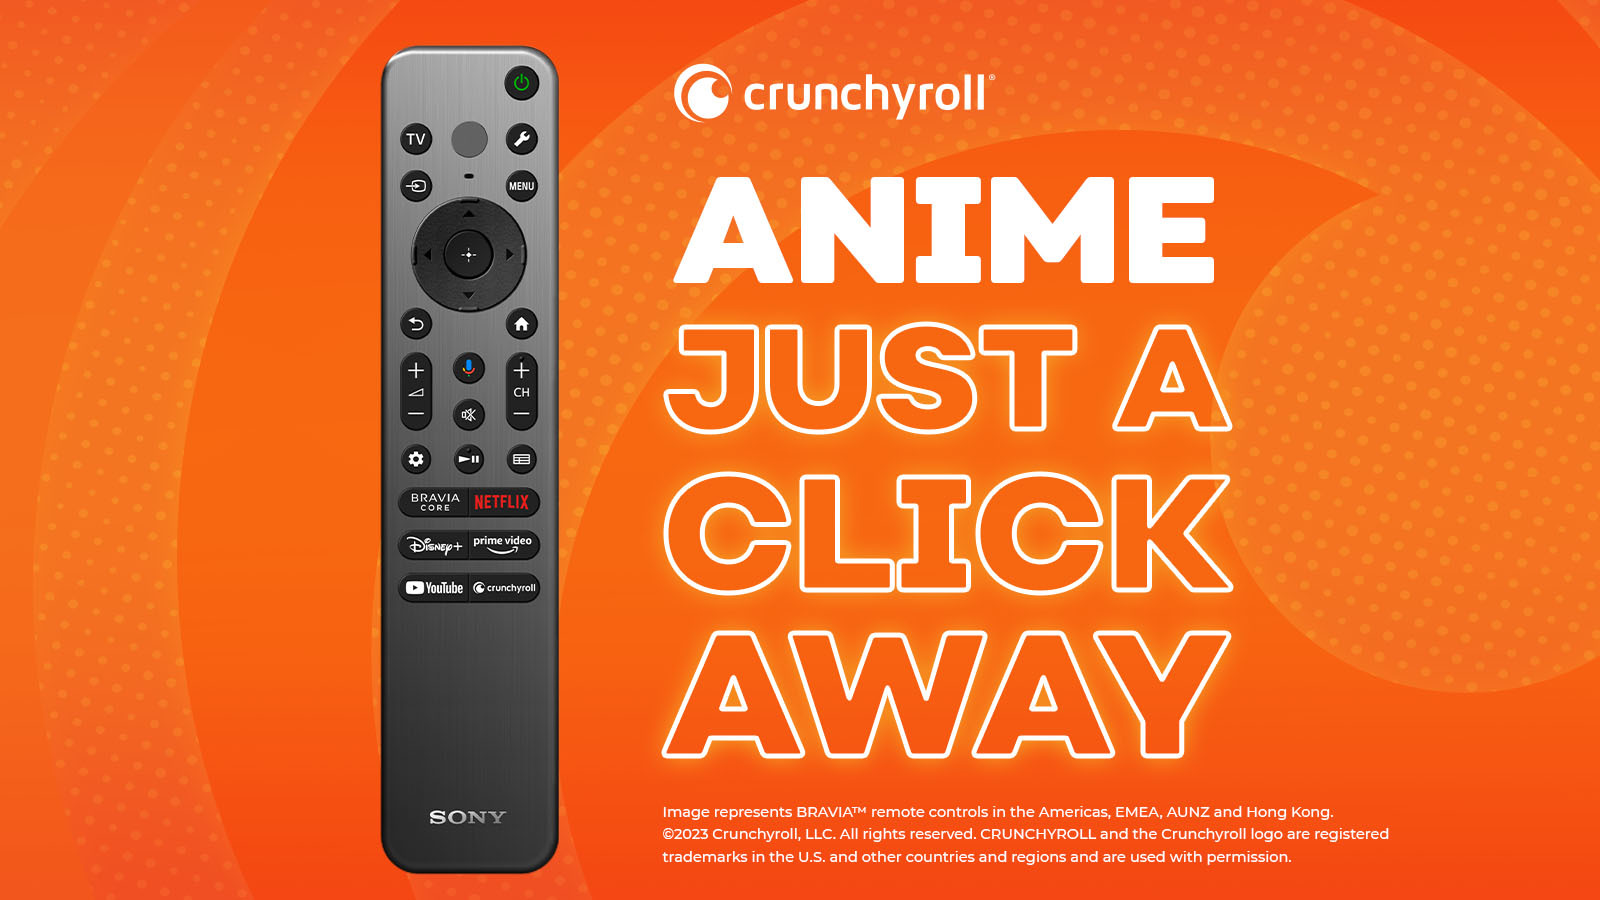 Crunchyroll Button to Be Featured on 2023 Sony BRAVIA TV Remotes